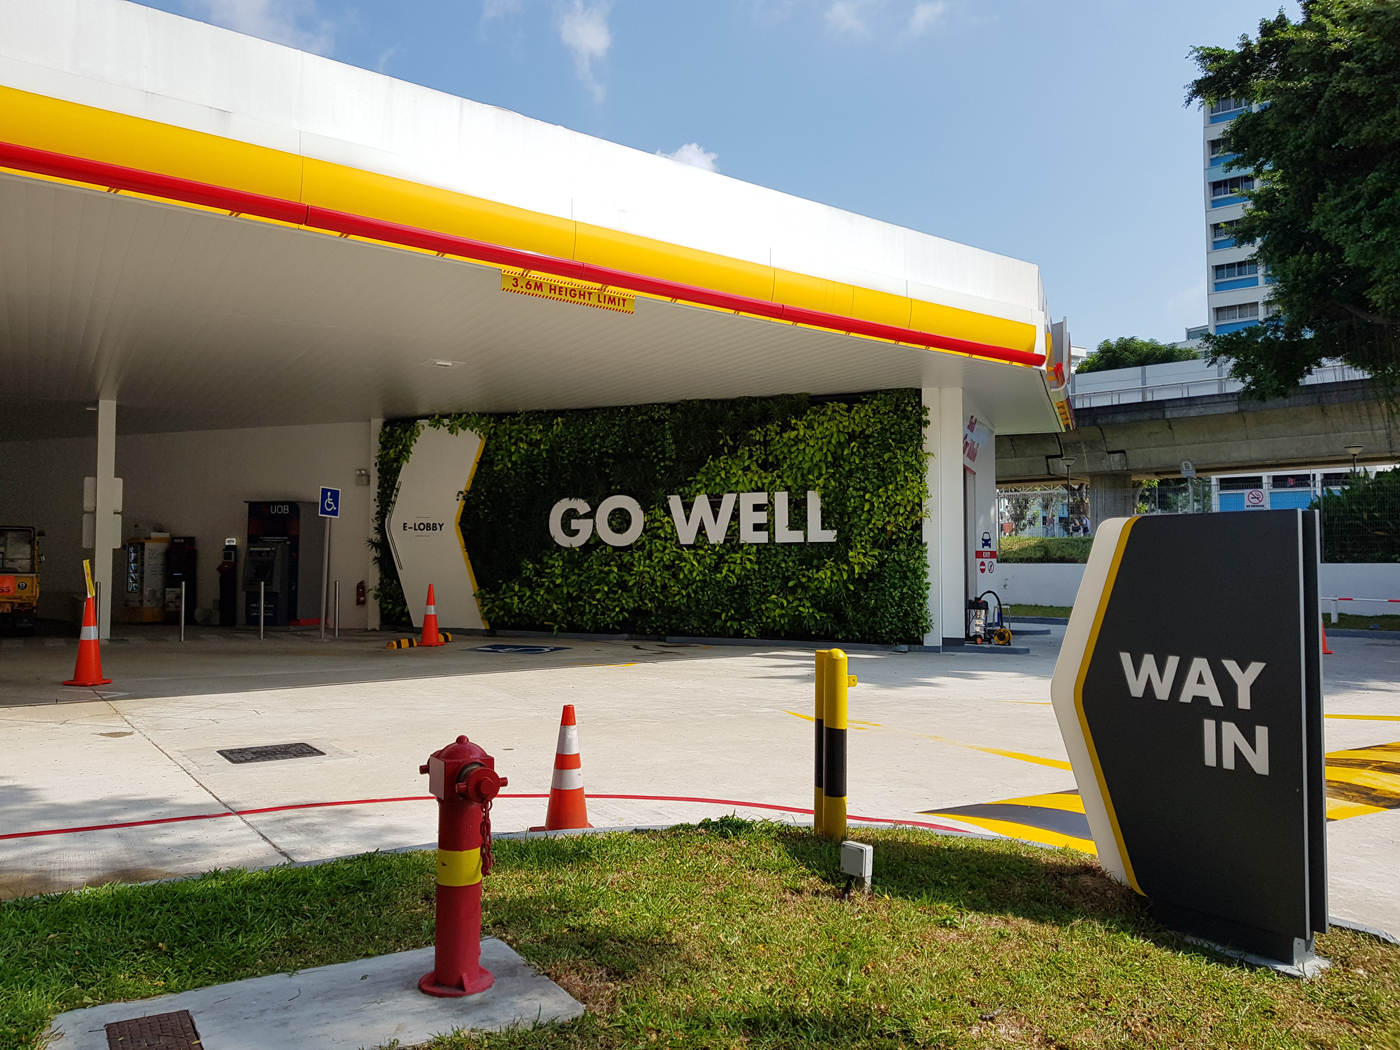 Shell Petrol Station @ Tampines Avenue 2